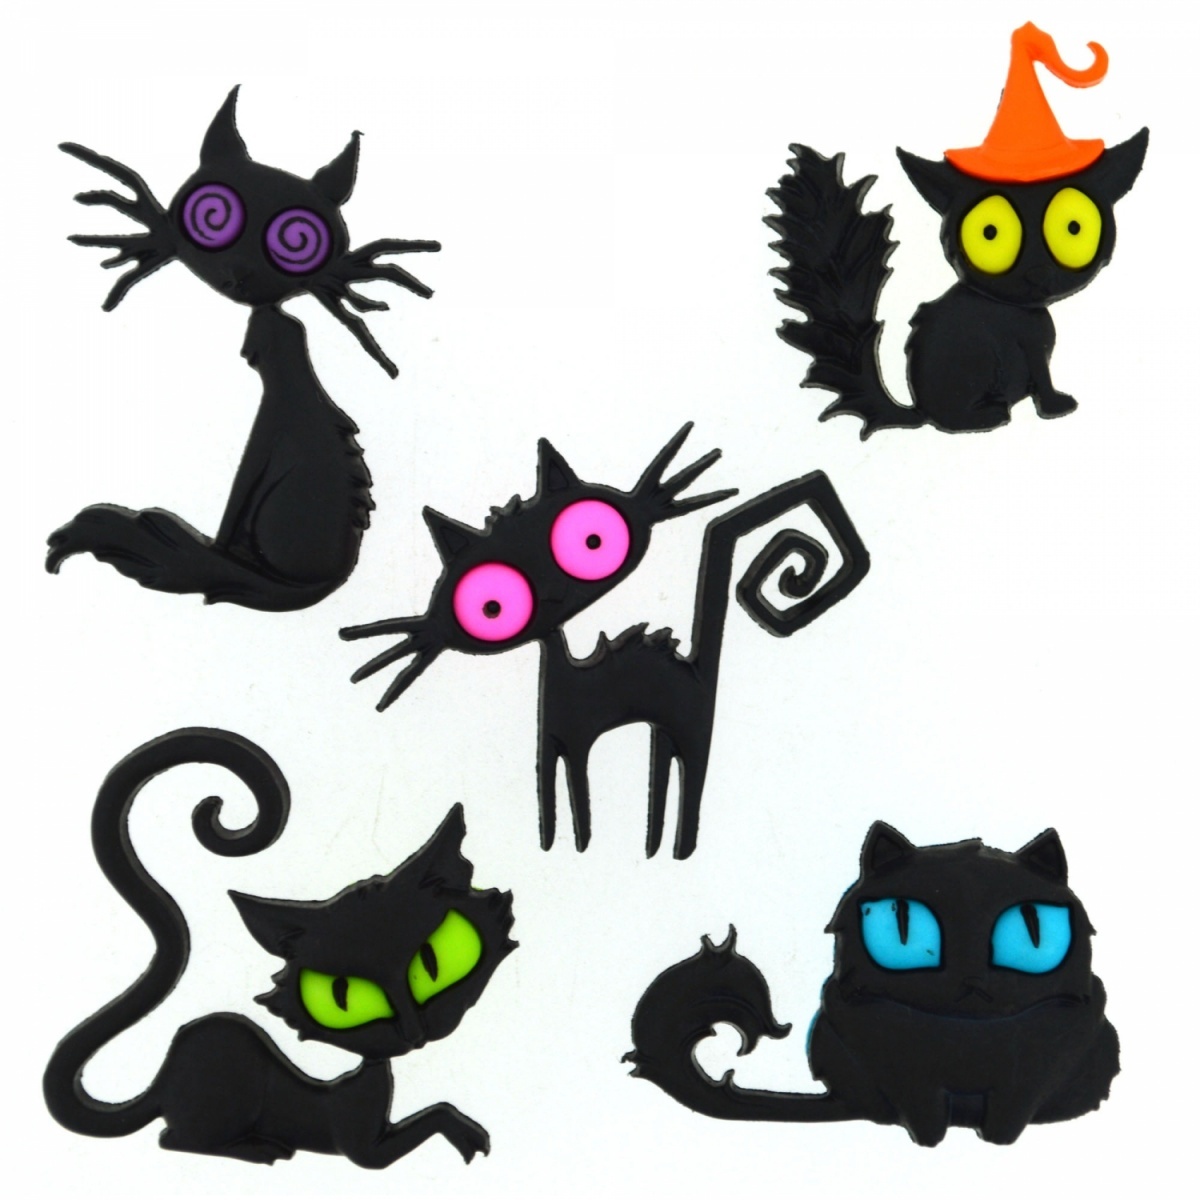 Creeped Out Cats Set of Decorative Buttons фото 1